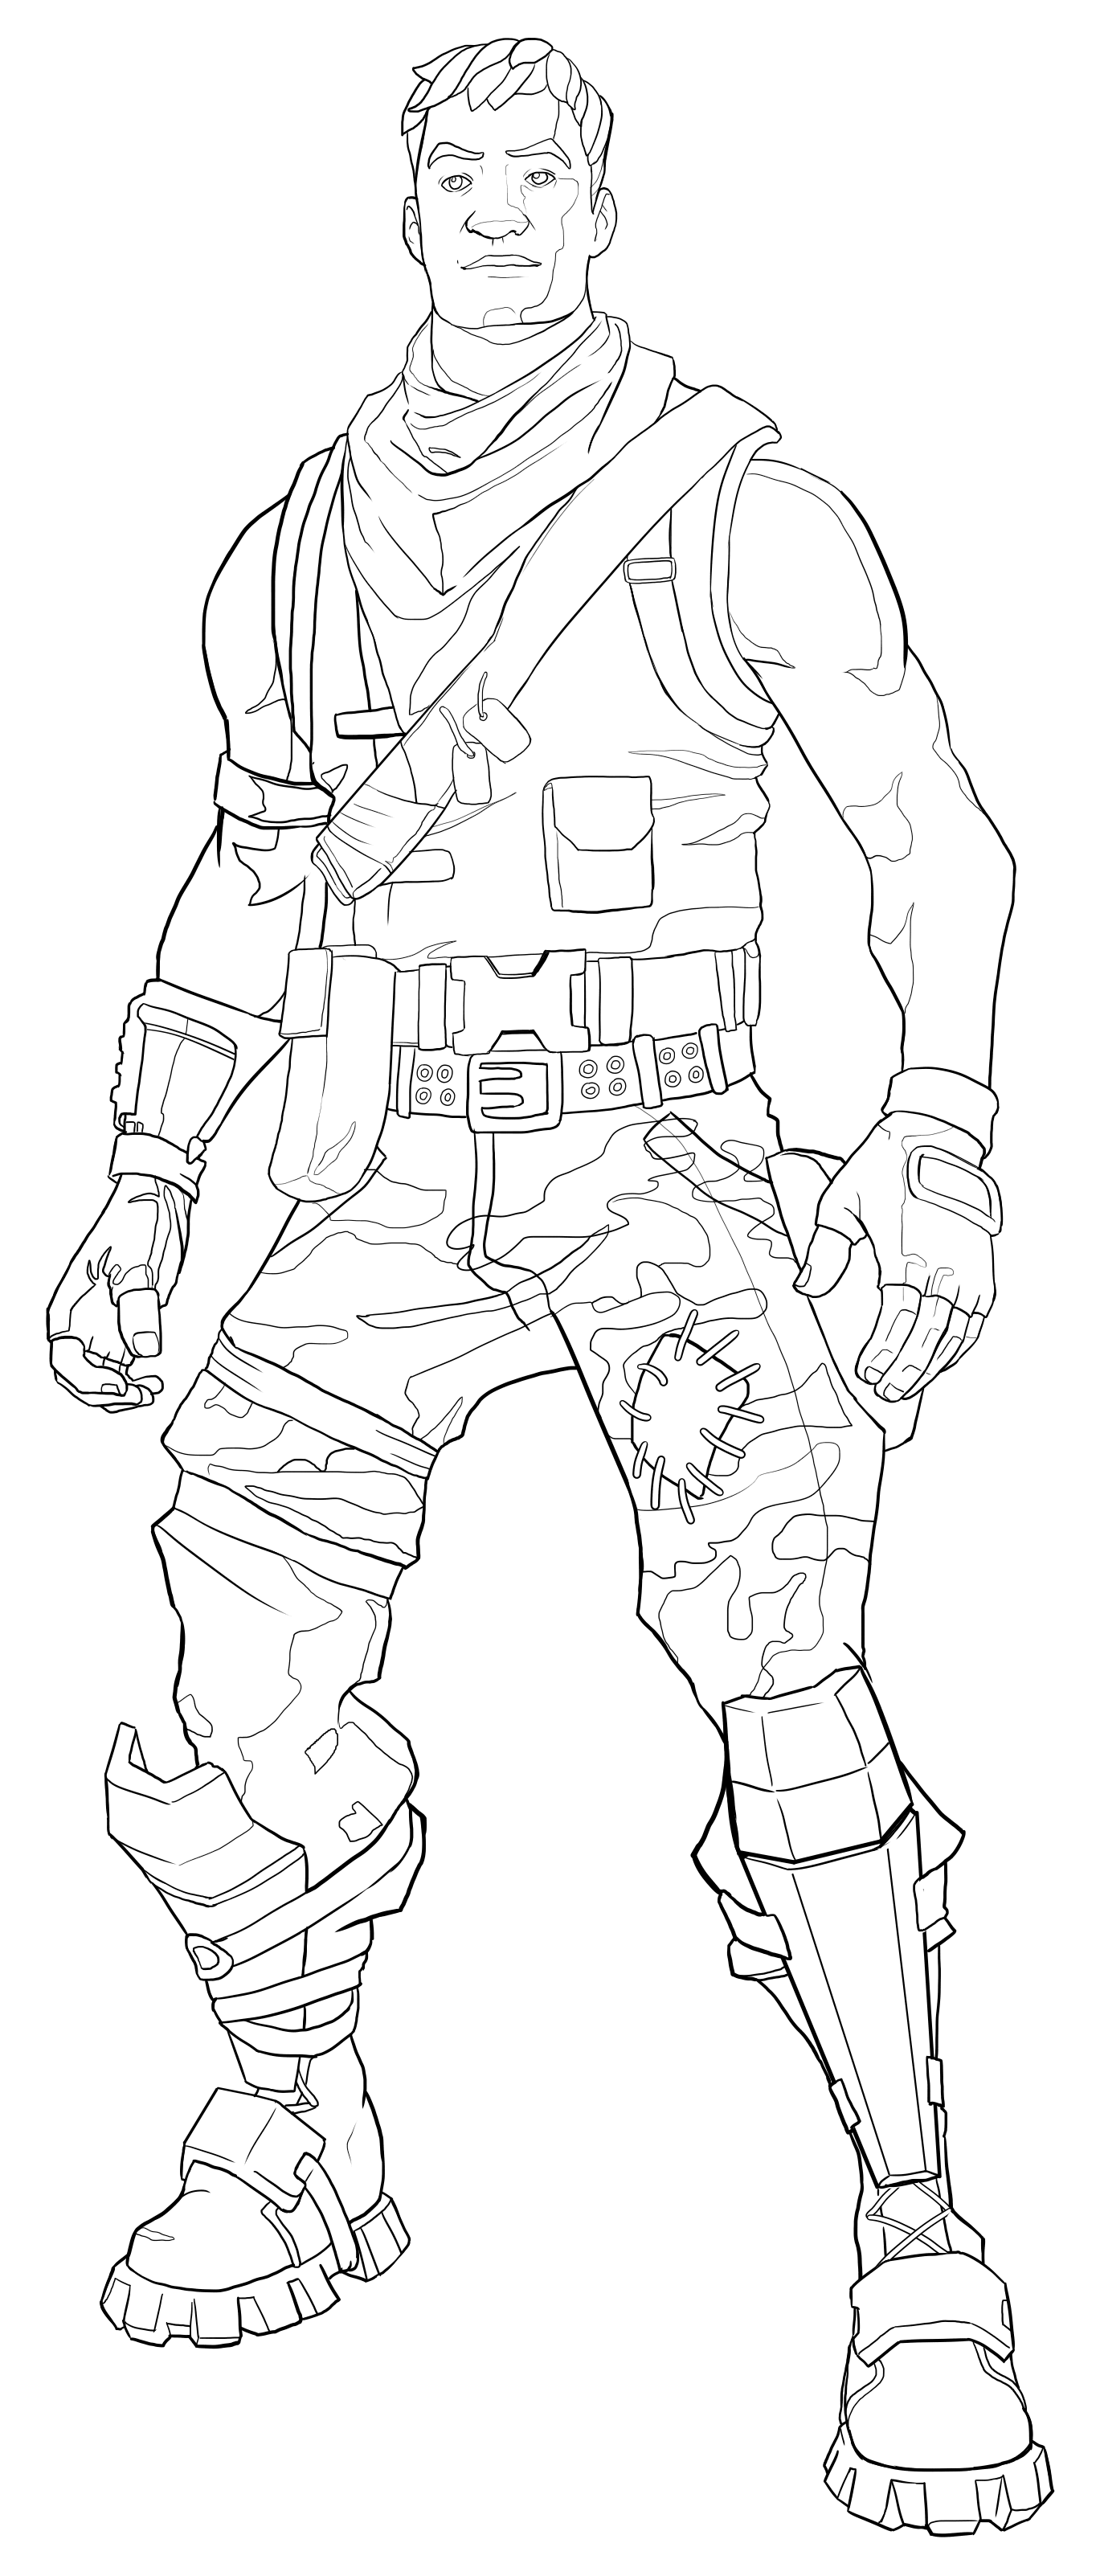 Fortnite Default Skin Coloring Page Male